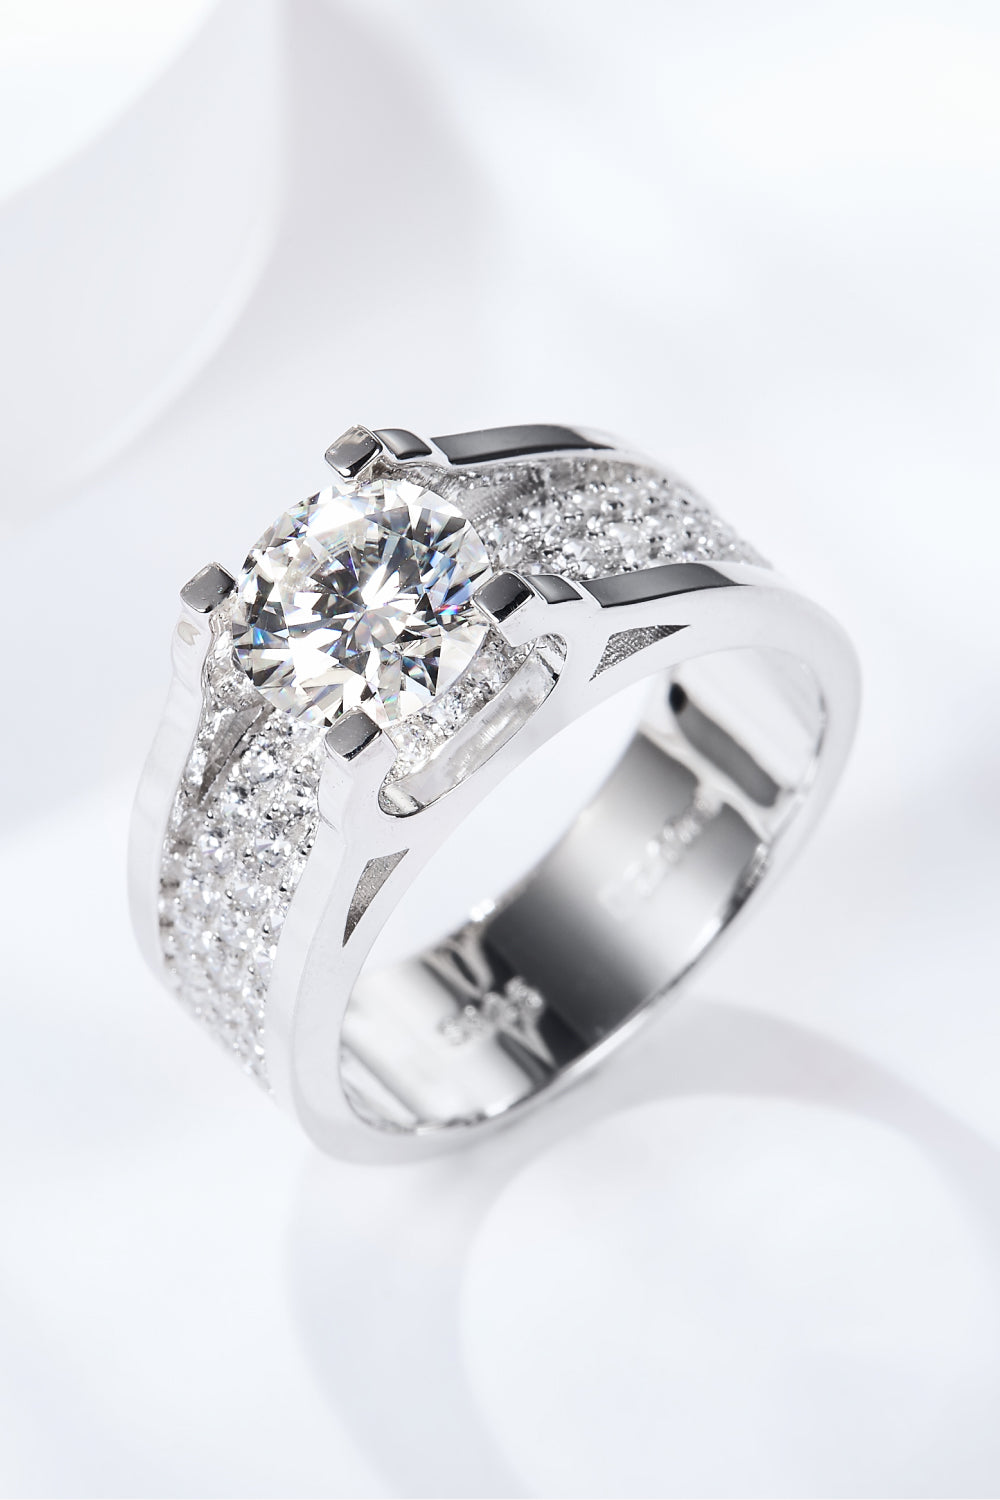 Made To Shine 1 Carat Moissanite Ring - Tophatter Deals